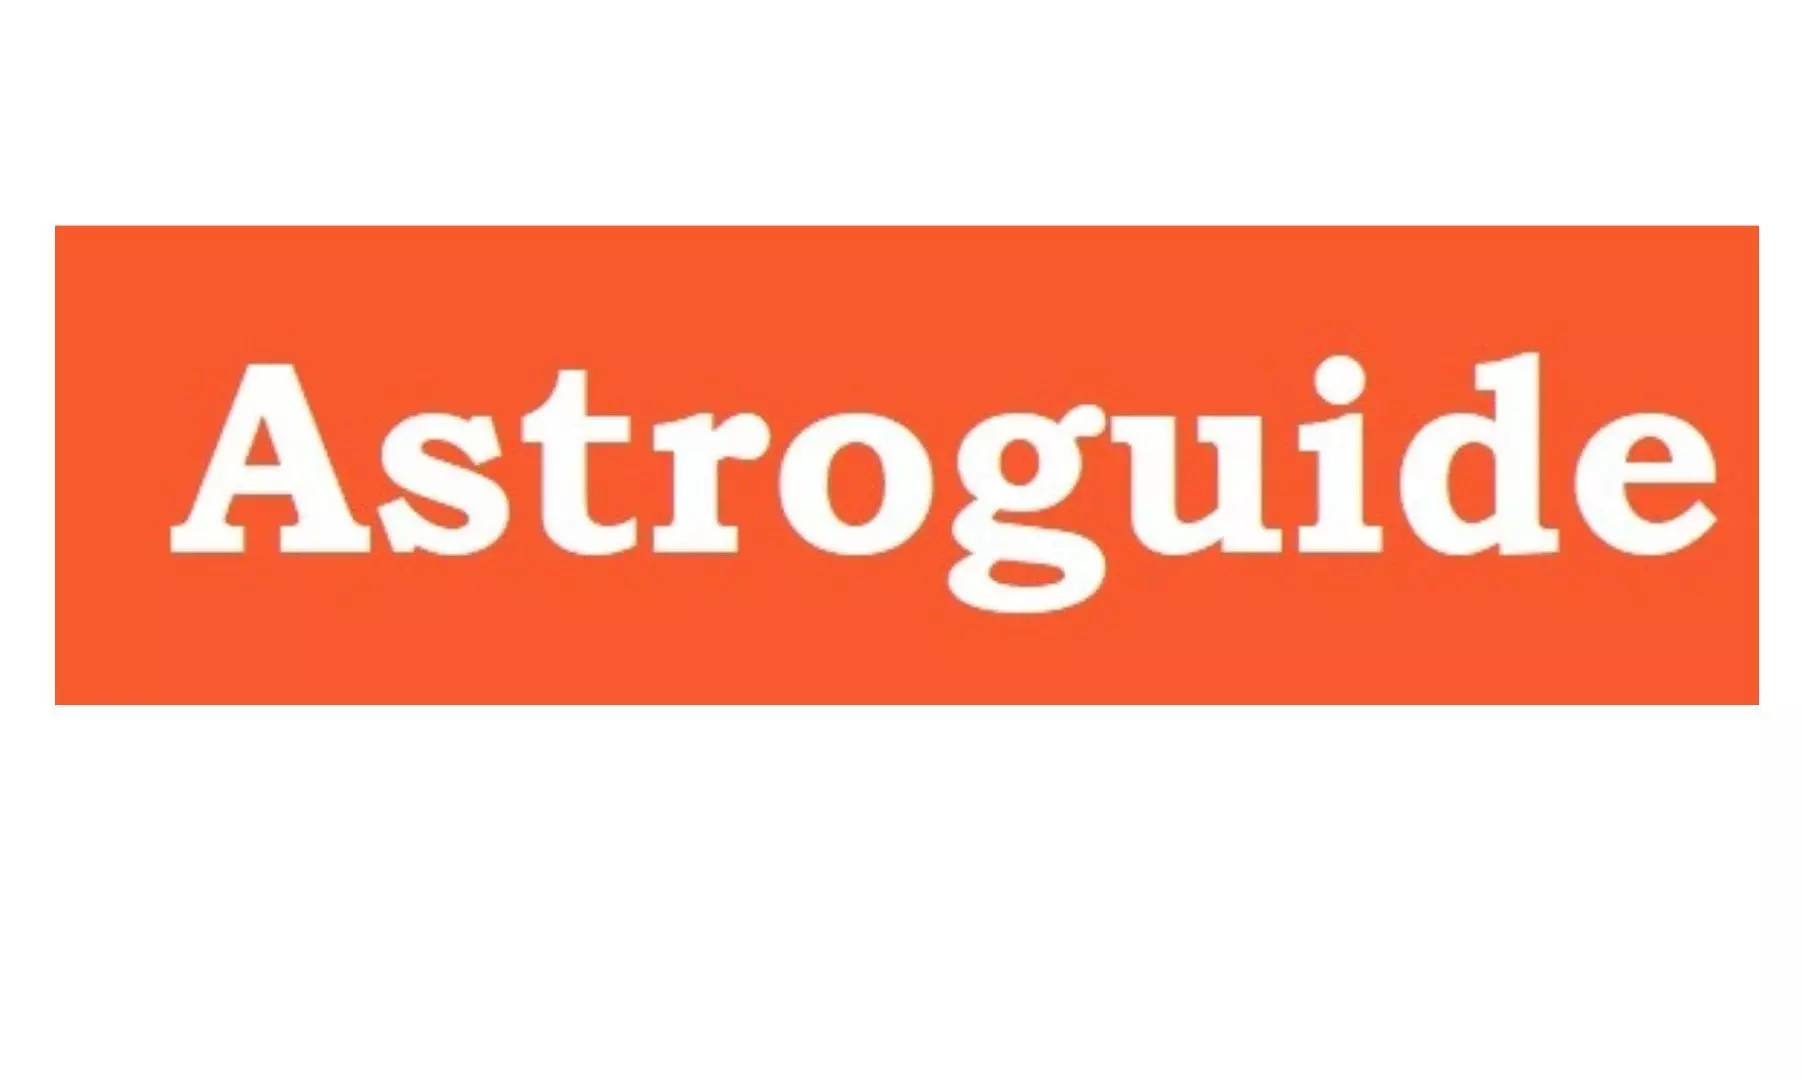 Astroguide, April 19, Friday